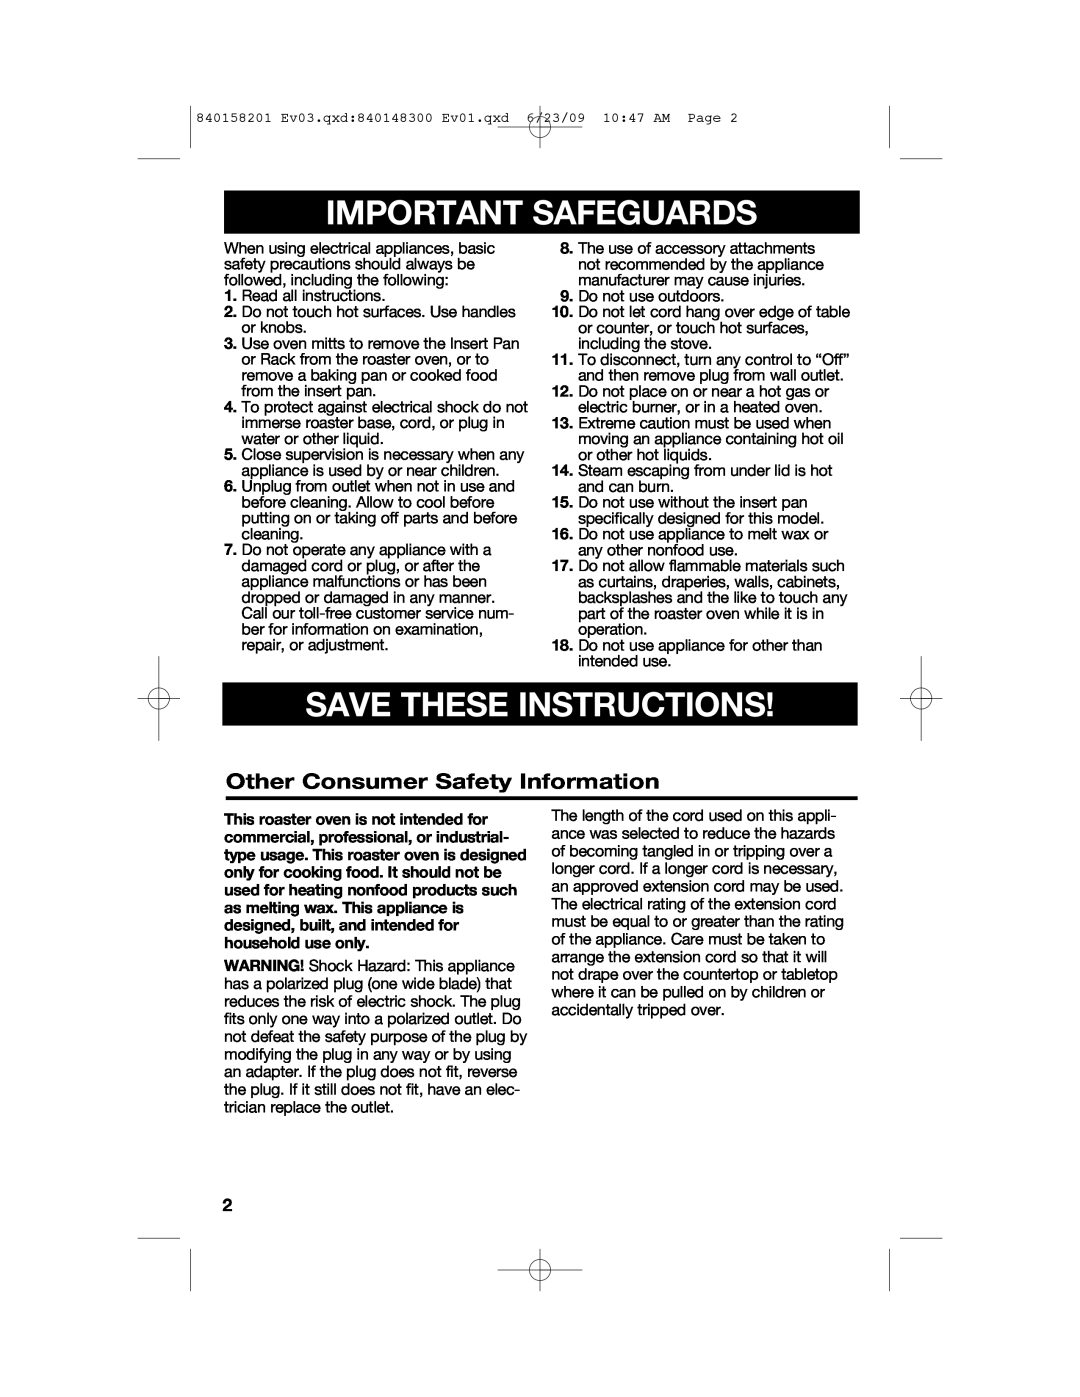 Hamilton Beach 840158201 manual Important Safeguards, Save These Instructions, Other Consumer Safety Information 